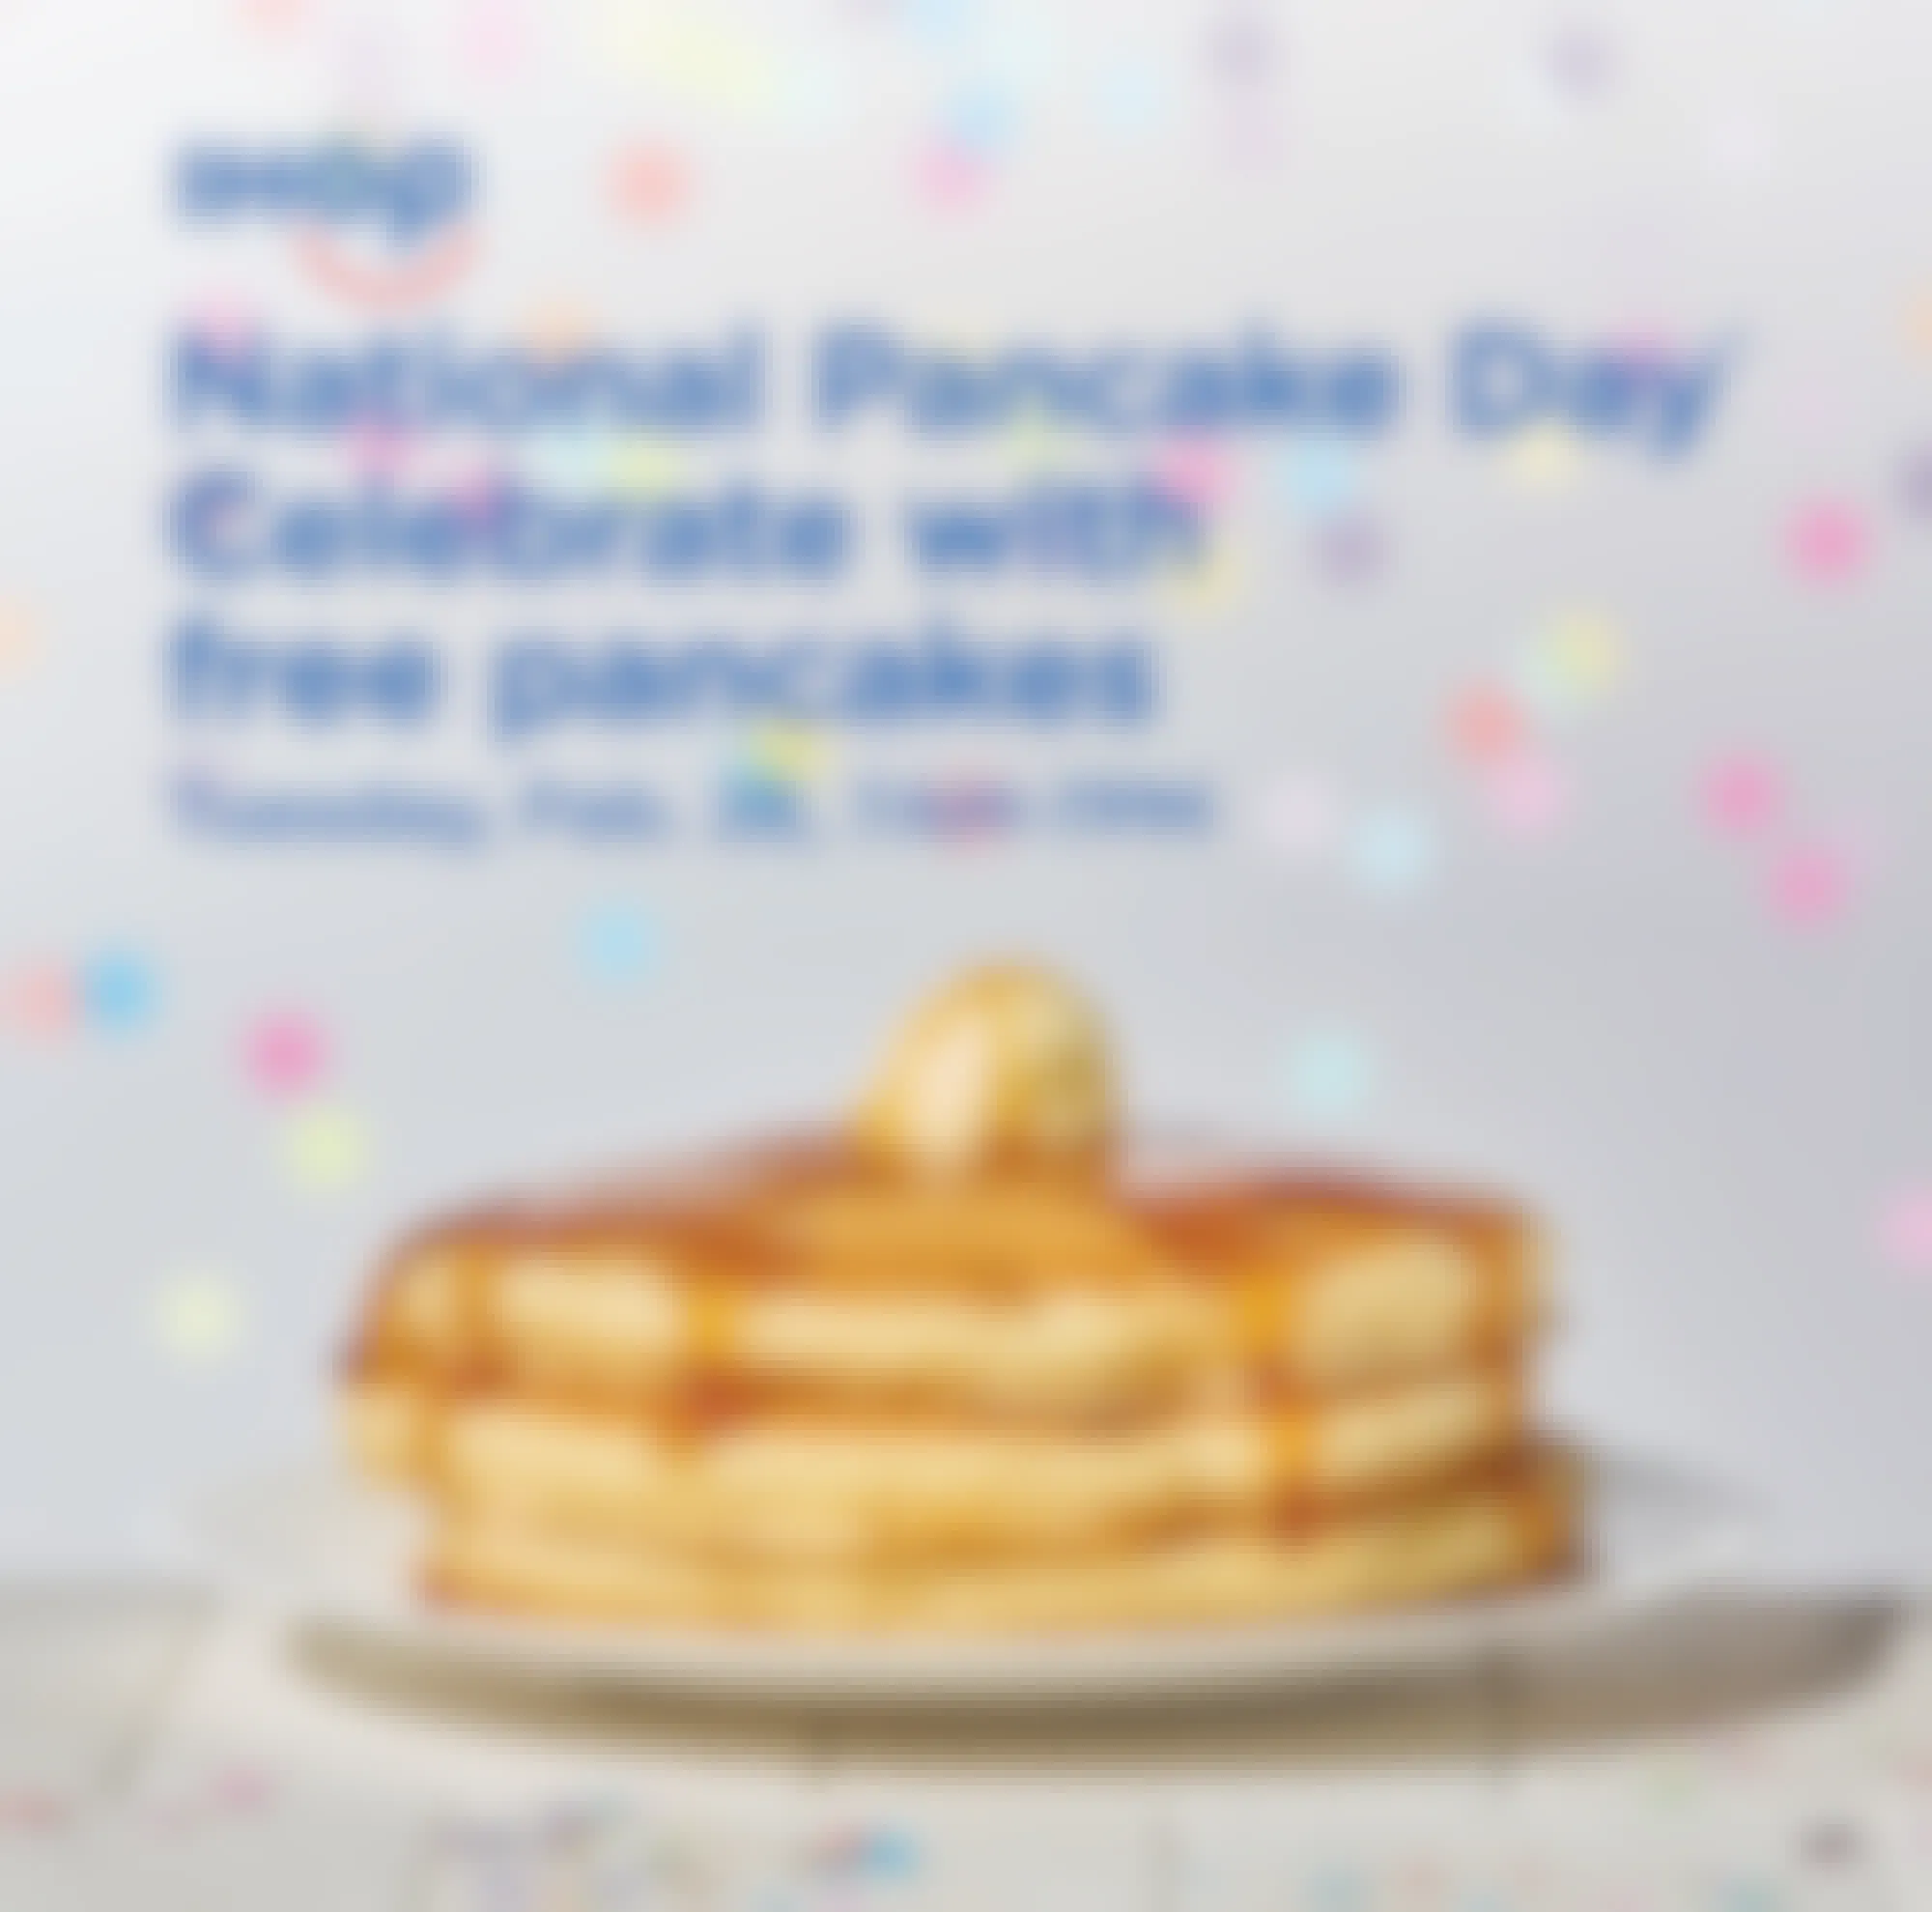 official promo for ihop national pancake day free pancakes